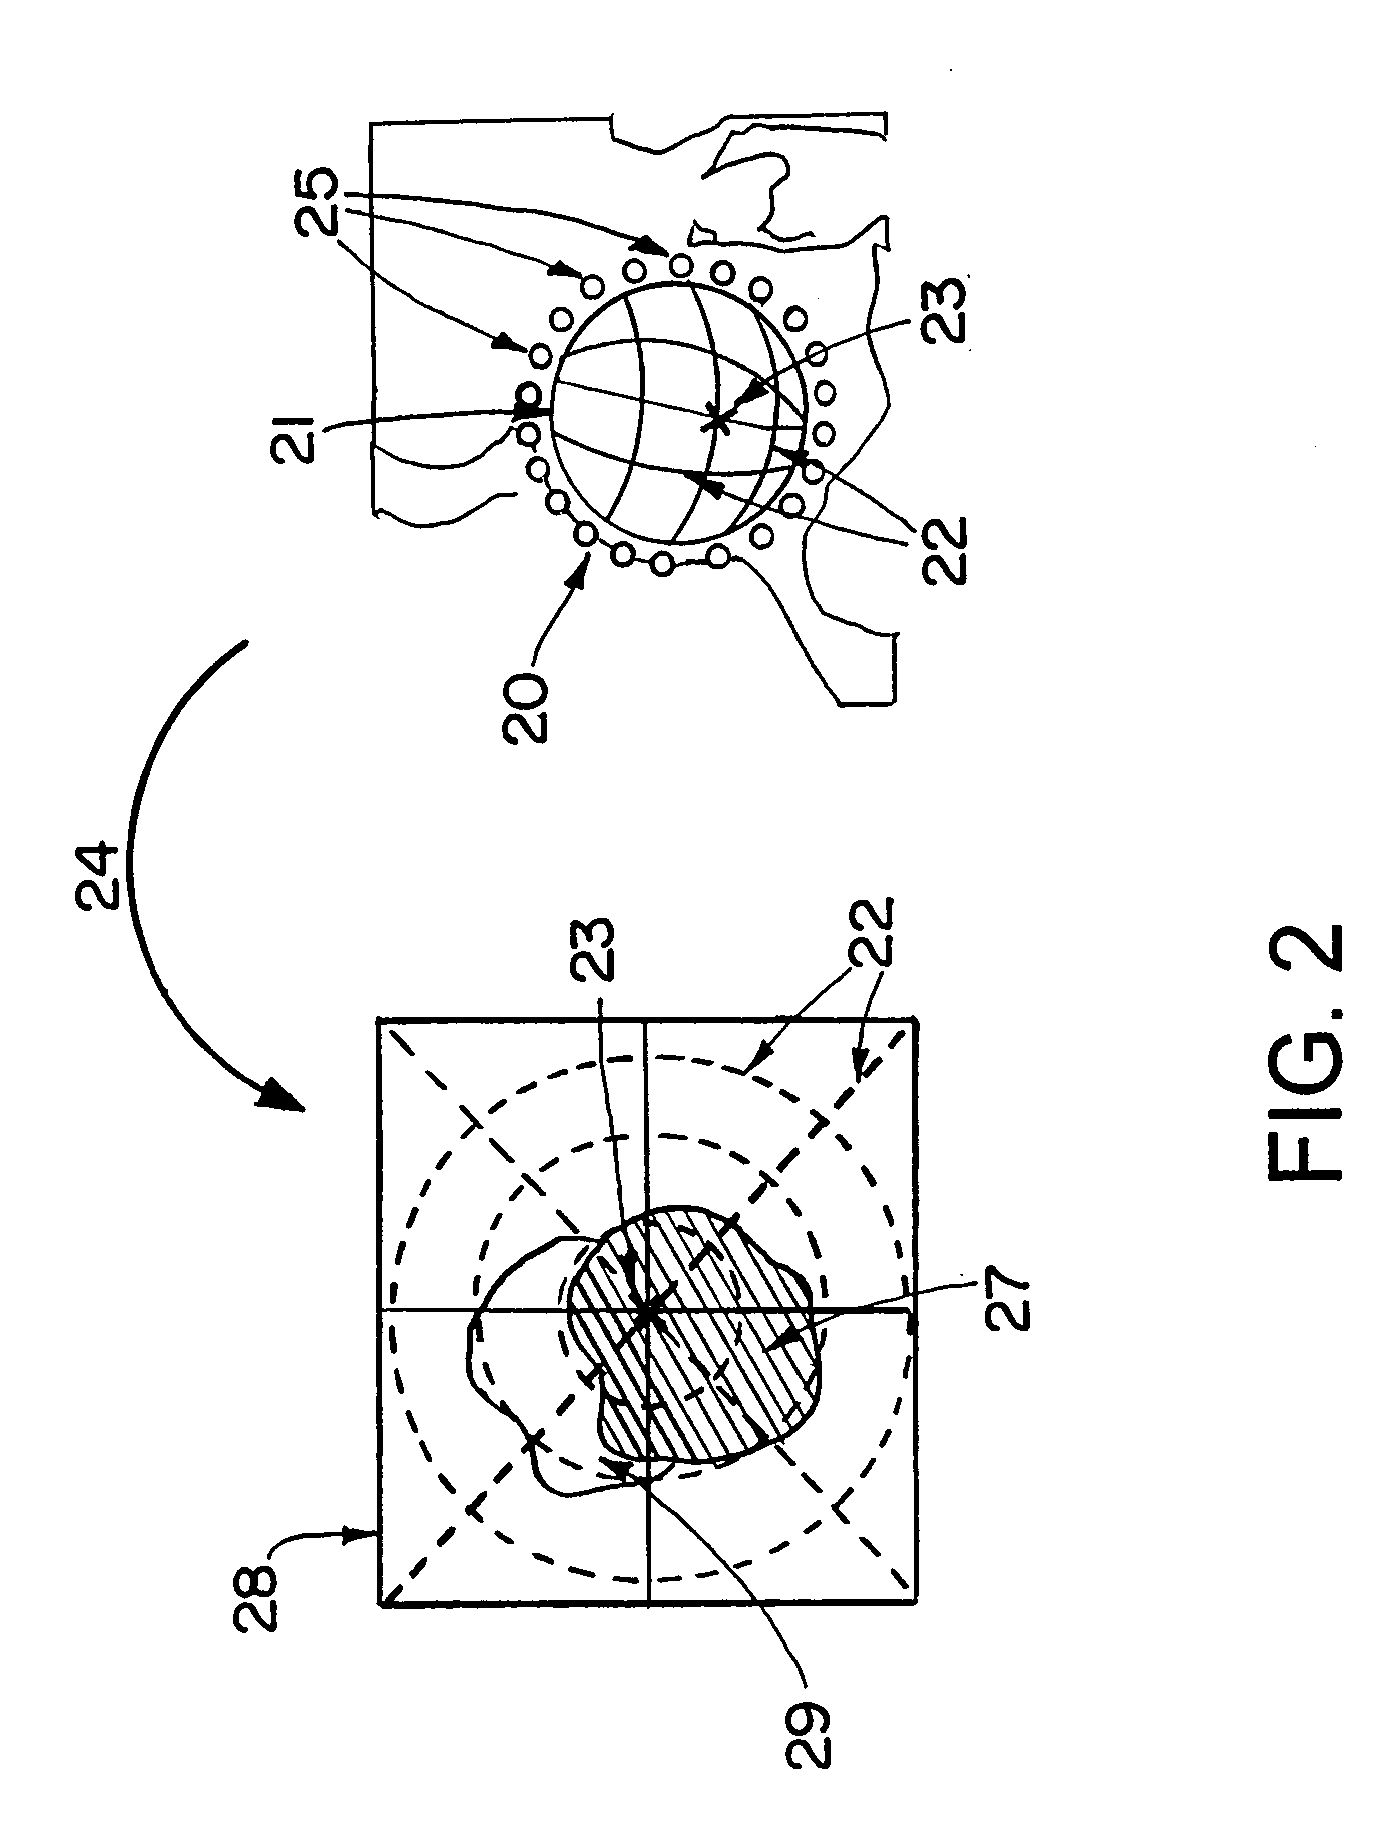 Computer-assisted joint analysis using surface projection